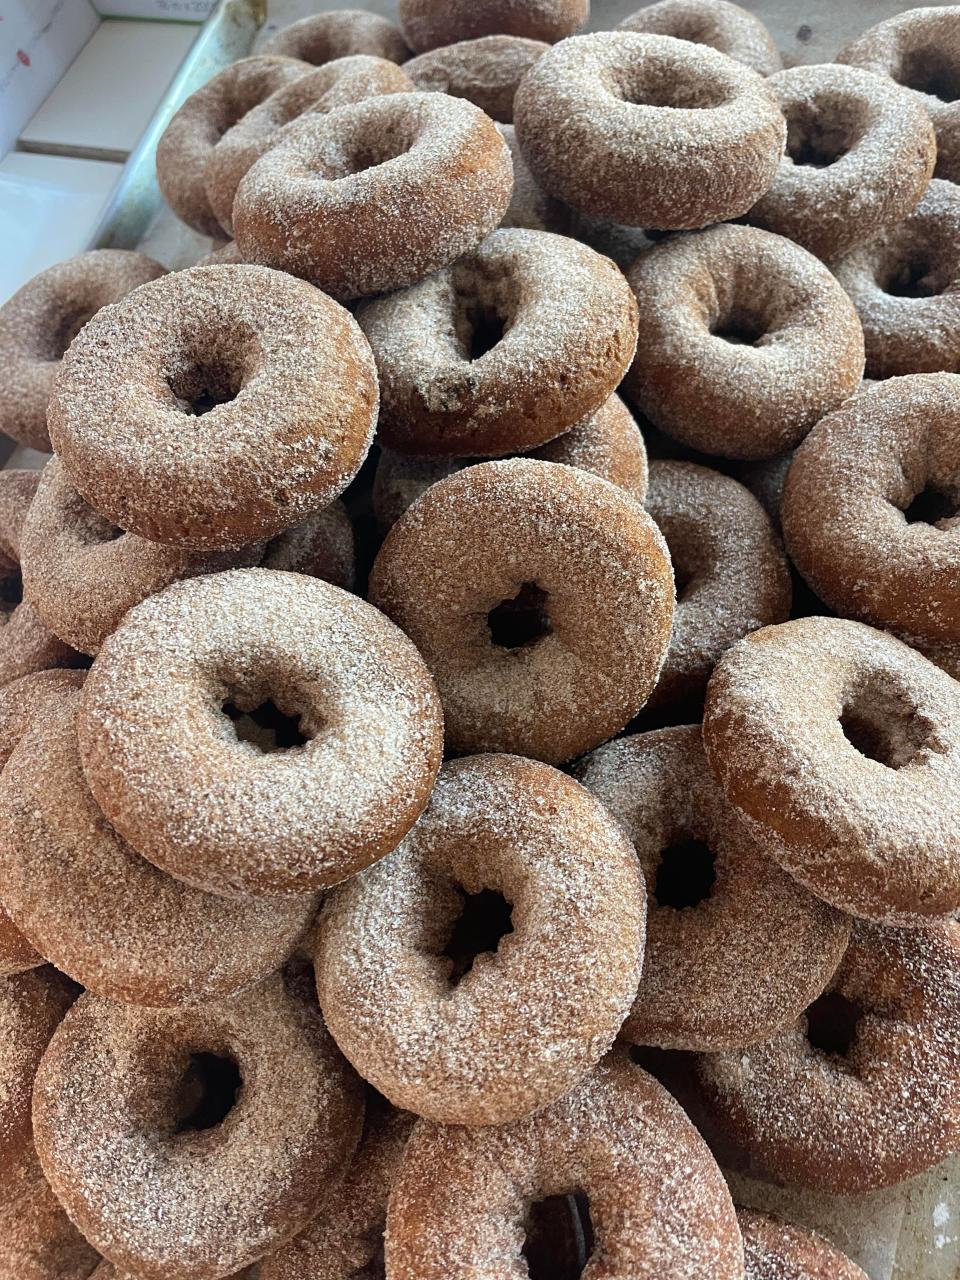 Apple cider donuts at Anna Bananas Bakery in the Manahawkin section of Stafford.